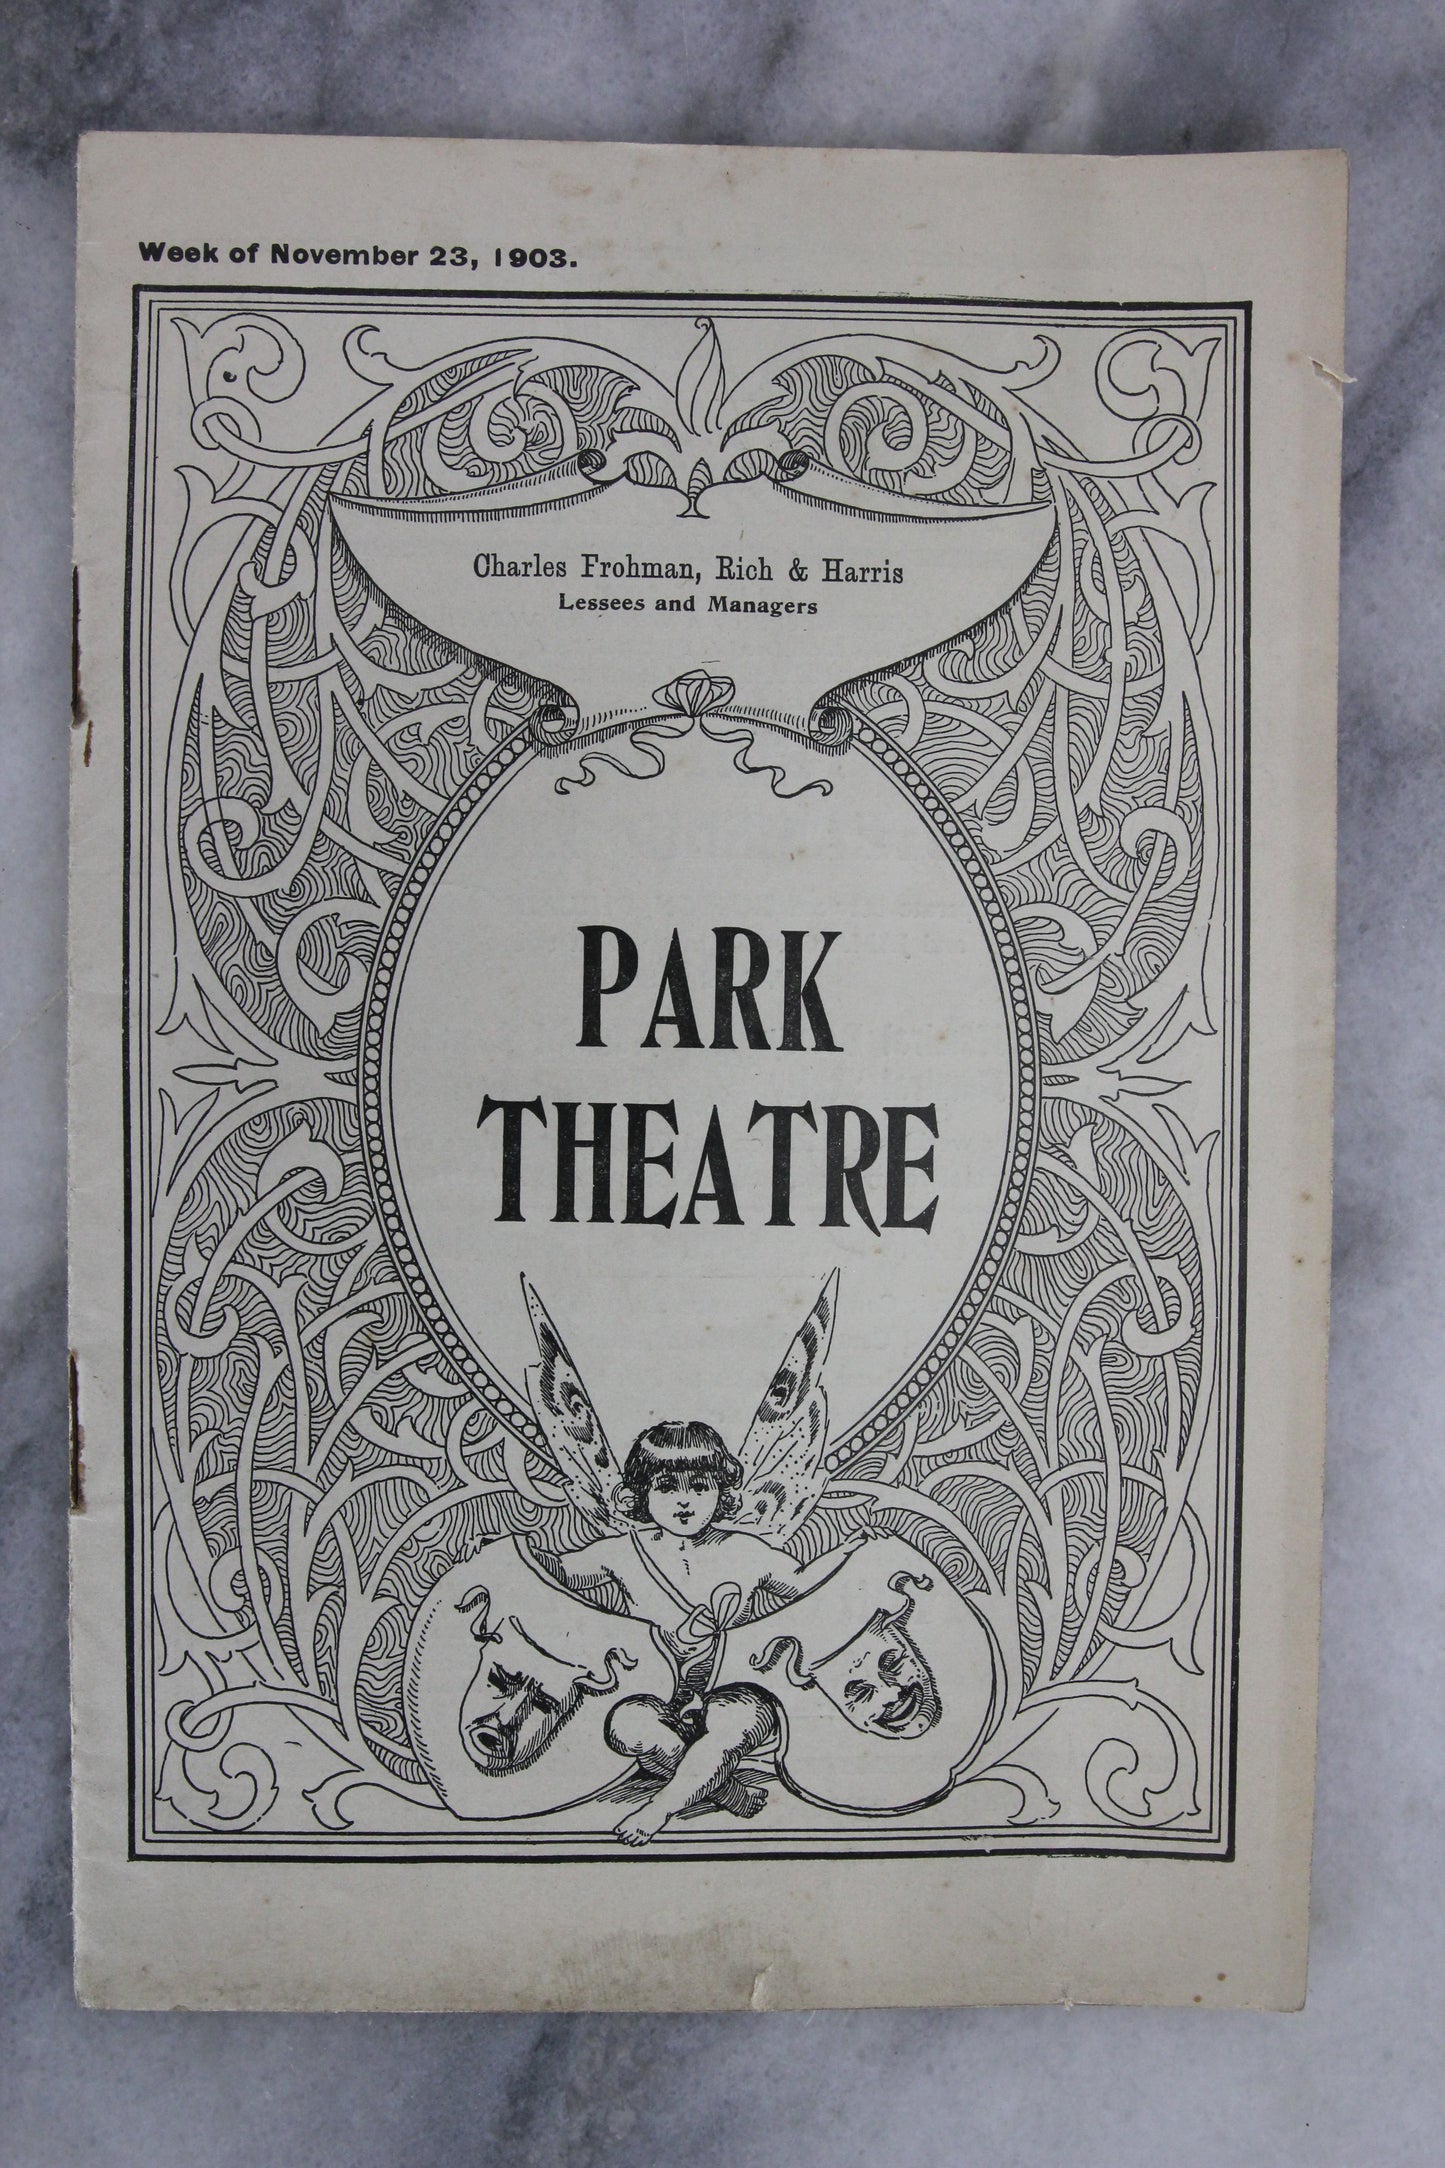 Antique Playbill from Park Theatre, Boston, Week of Nov. 23, 1903